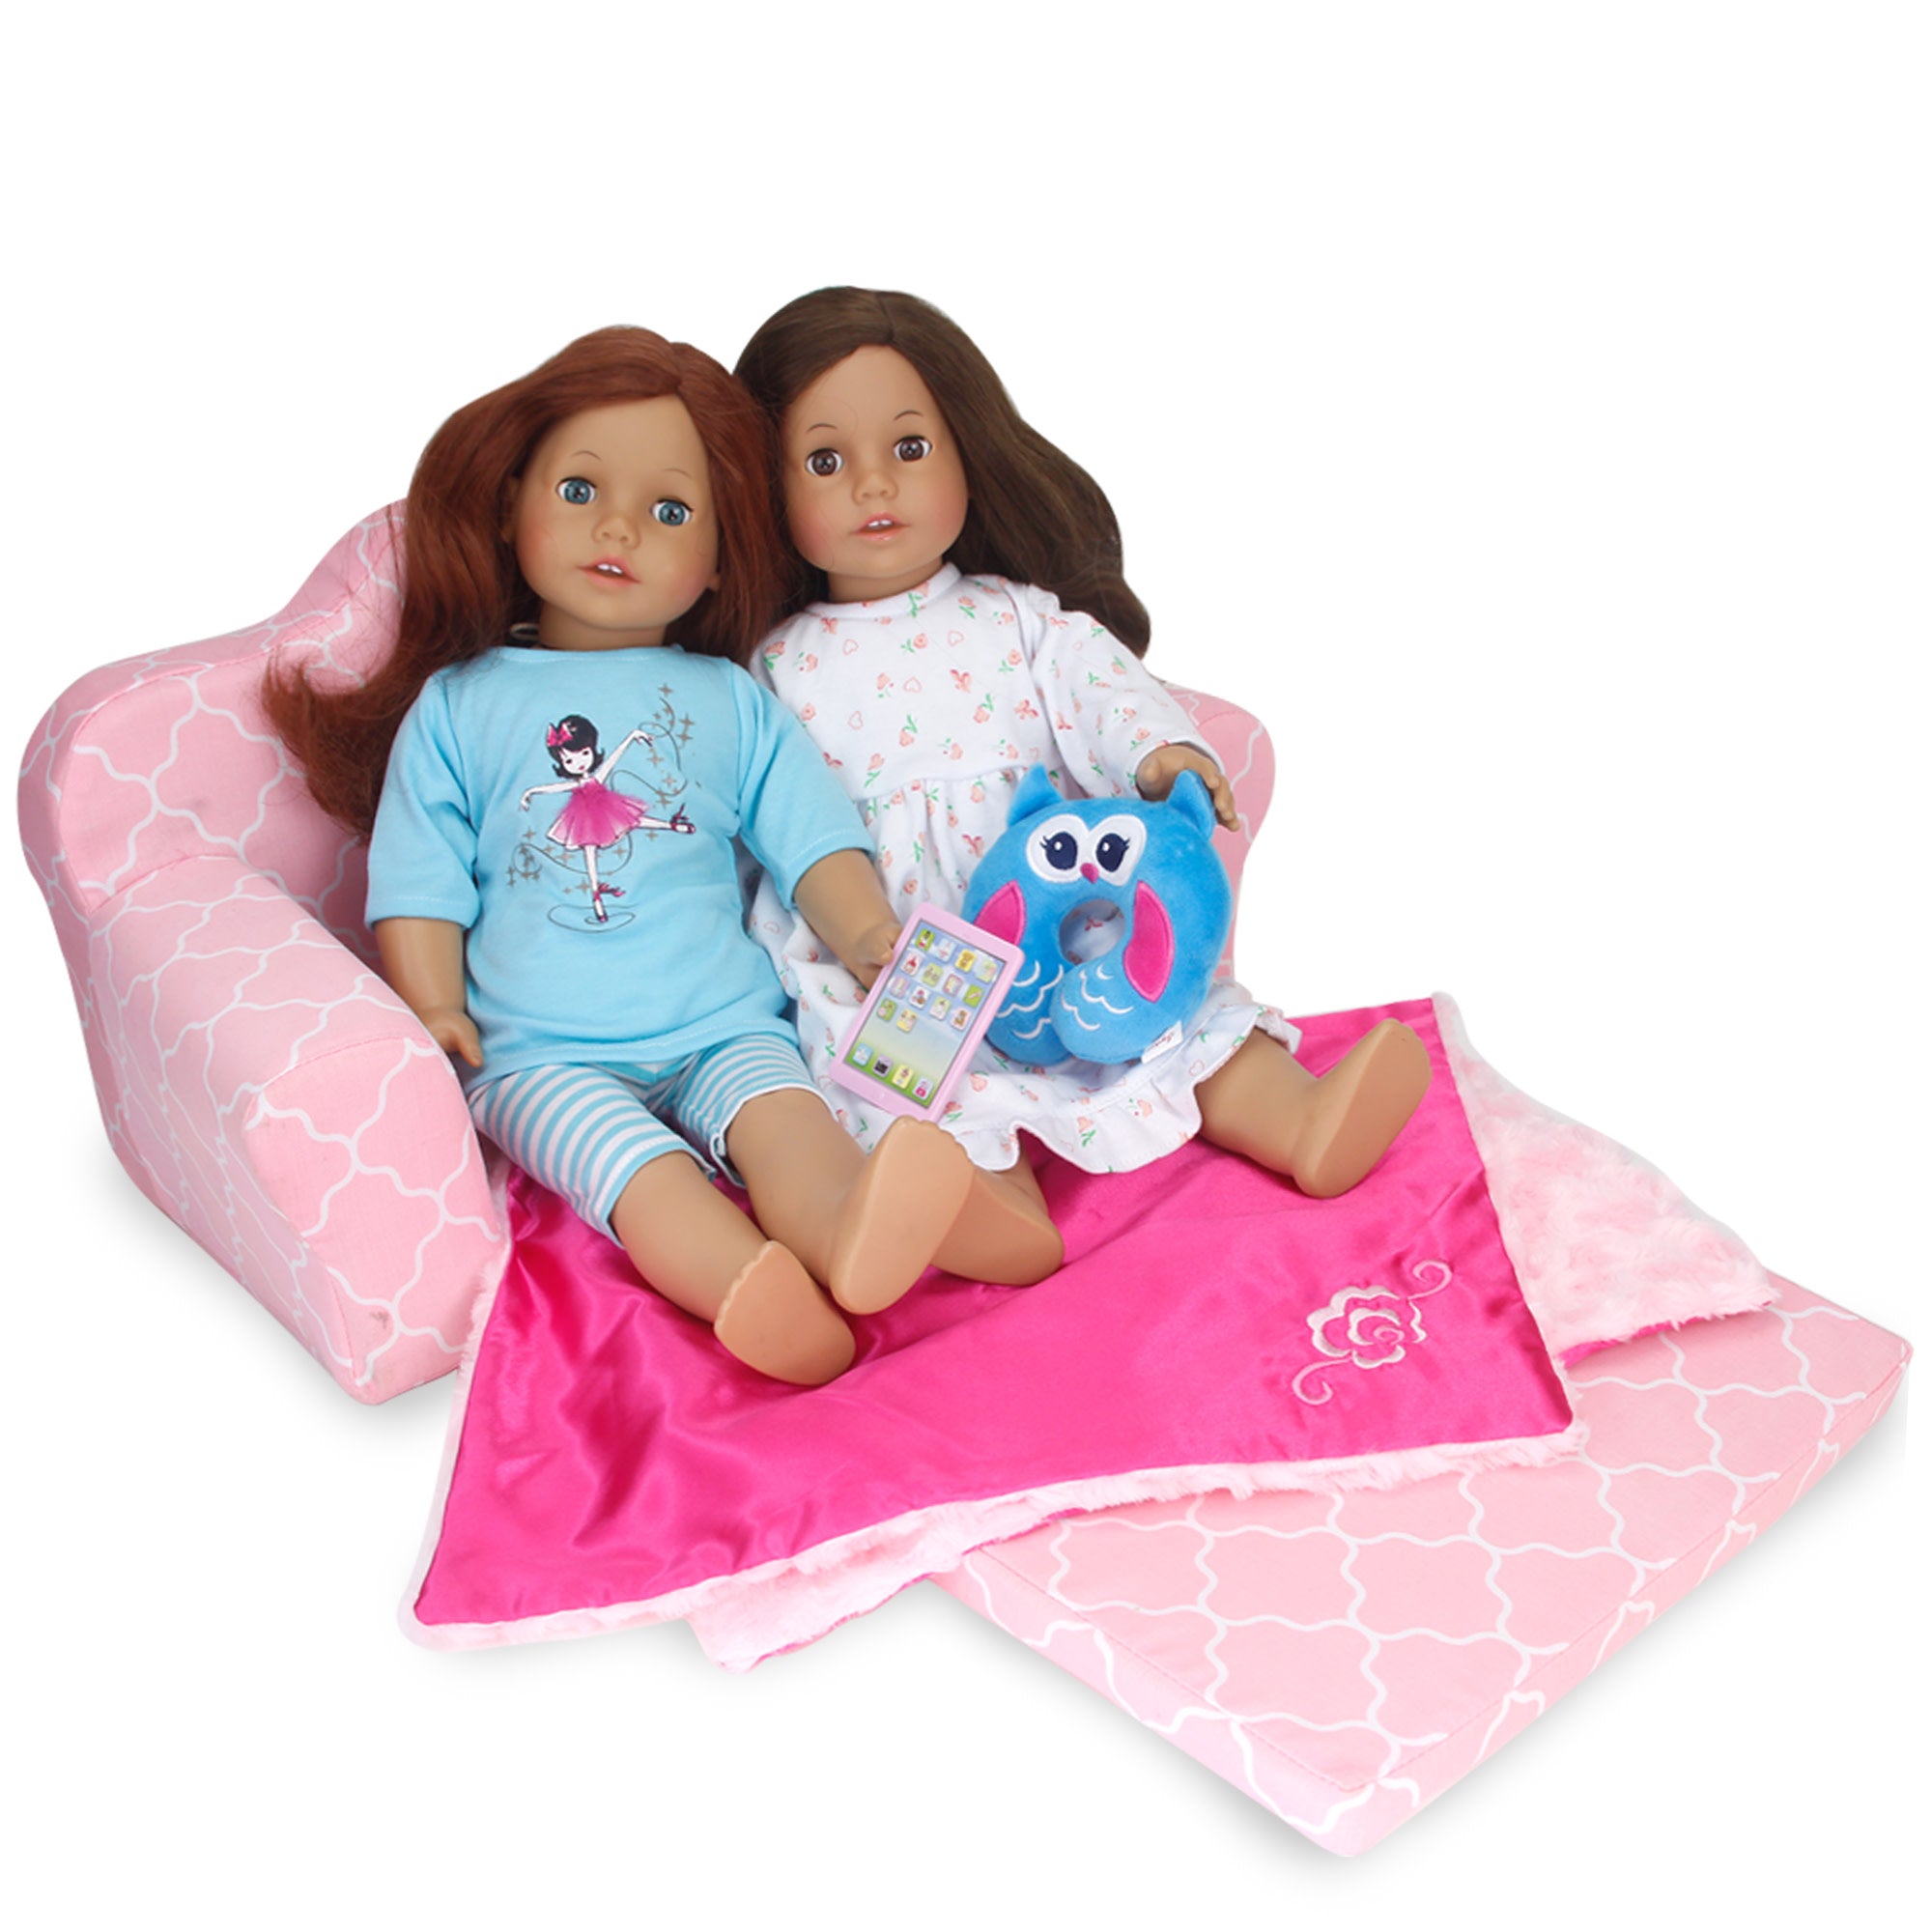 Sophia's 2-in-1 Plush Pull-Out Sofa Bed for Two 18'' Dolls, Pink